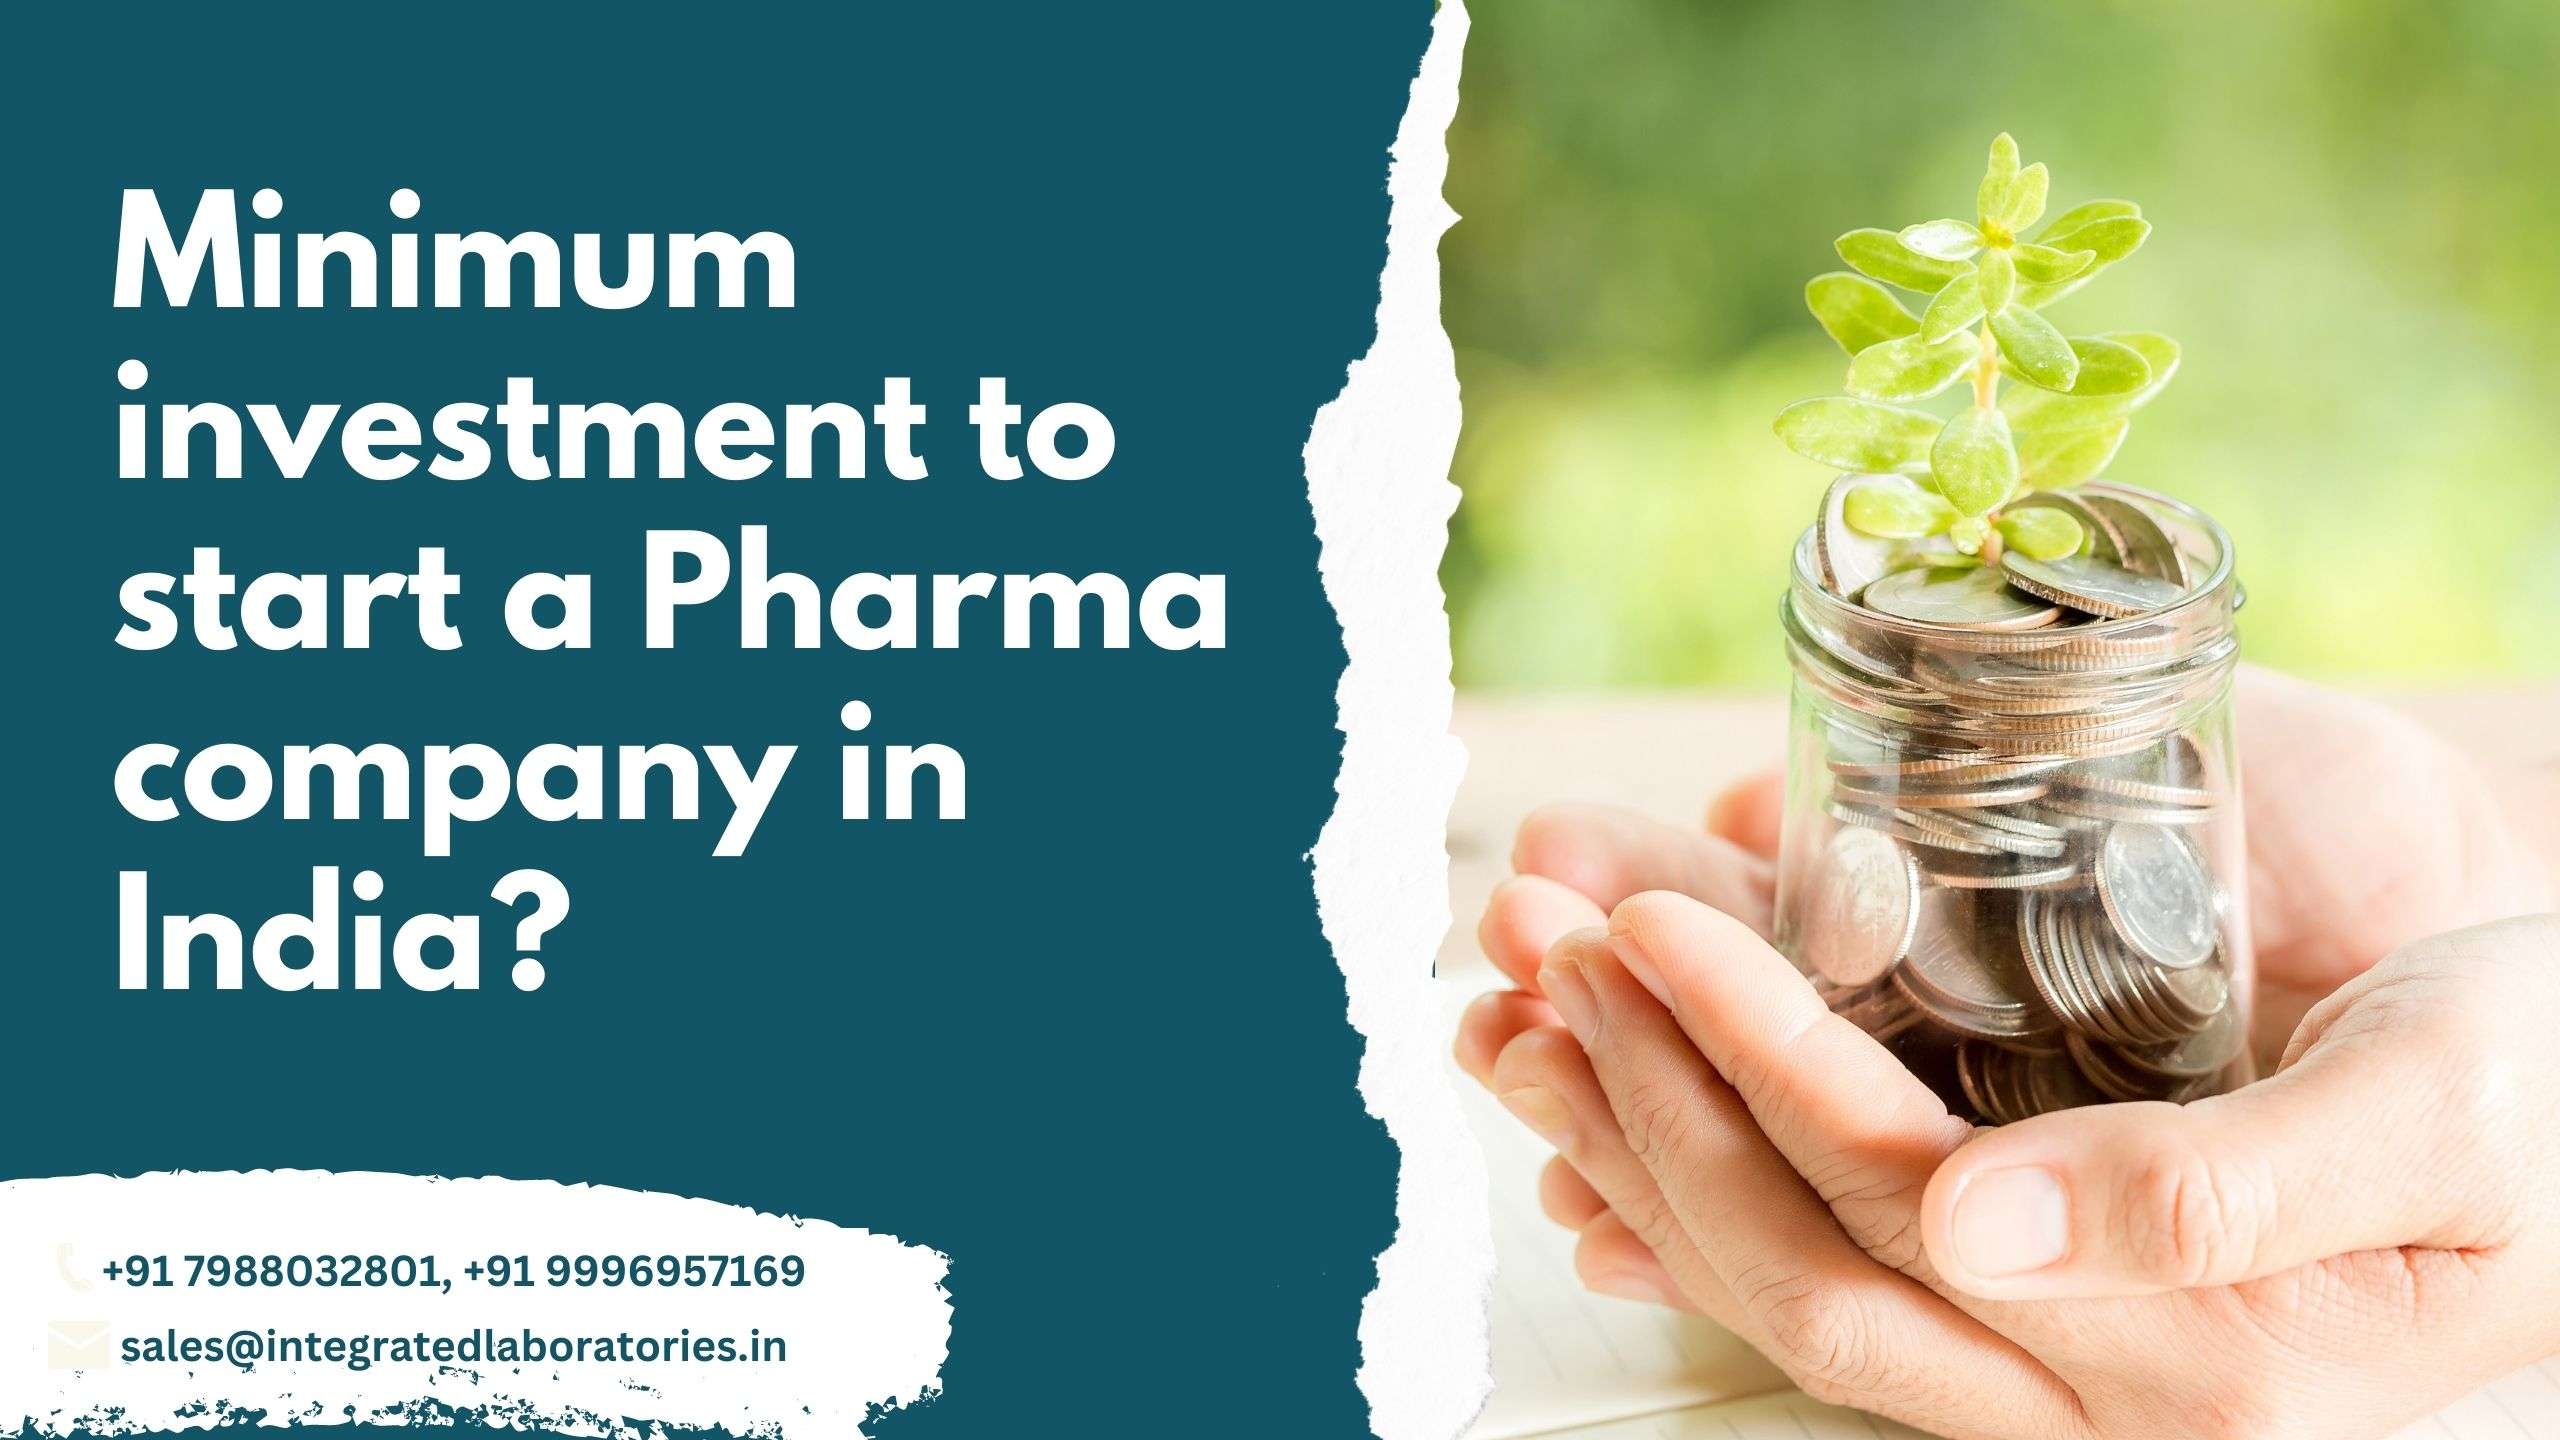 Minimum investment to start a Pharma company in India?